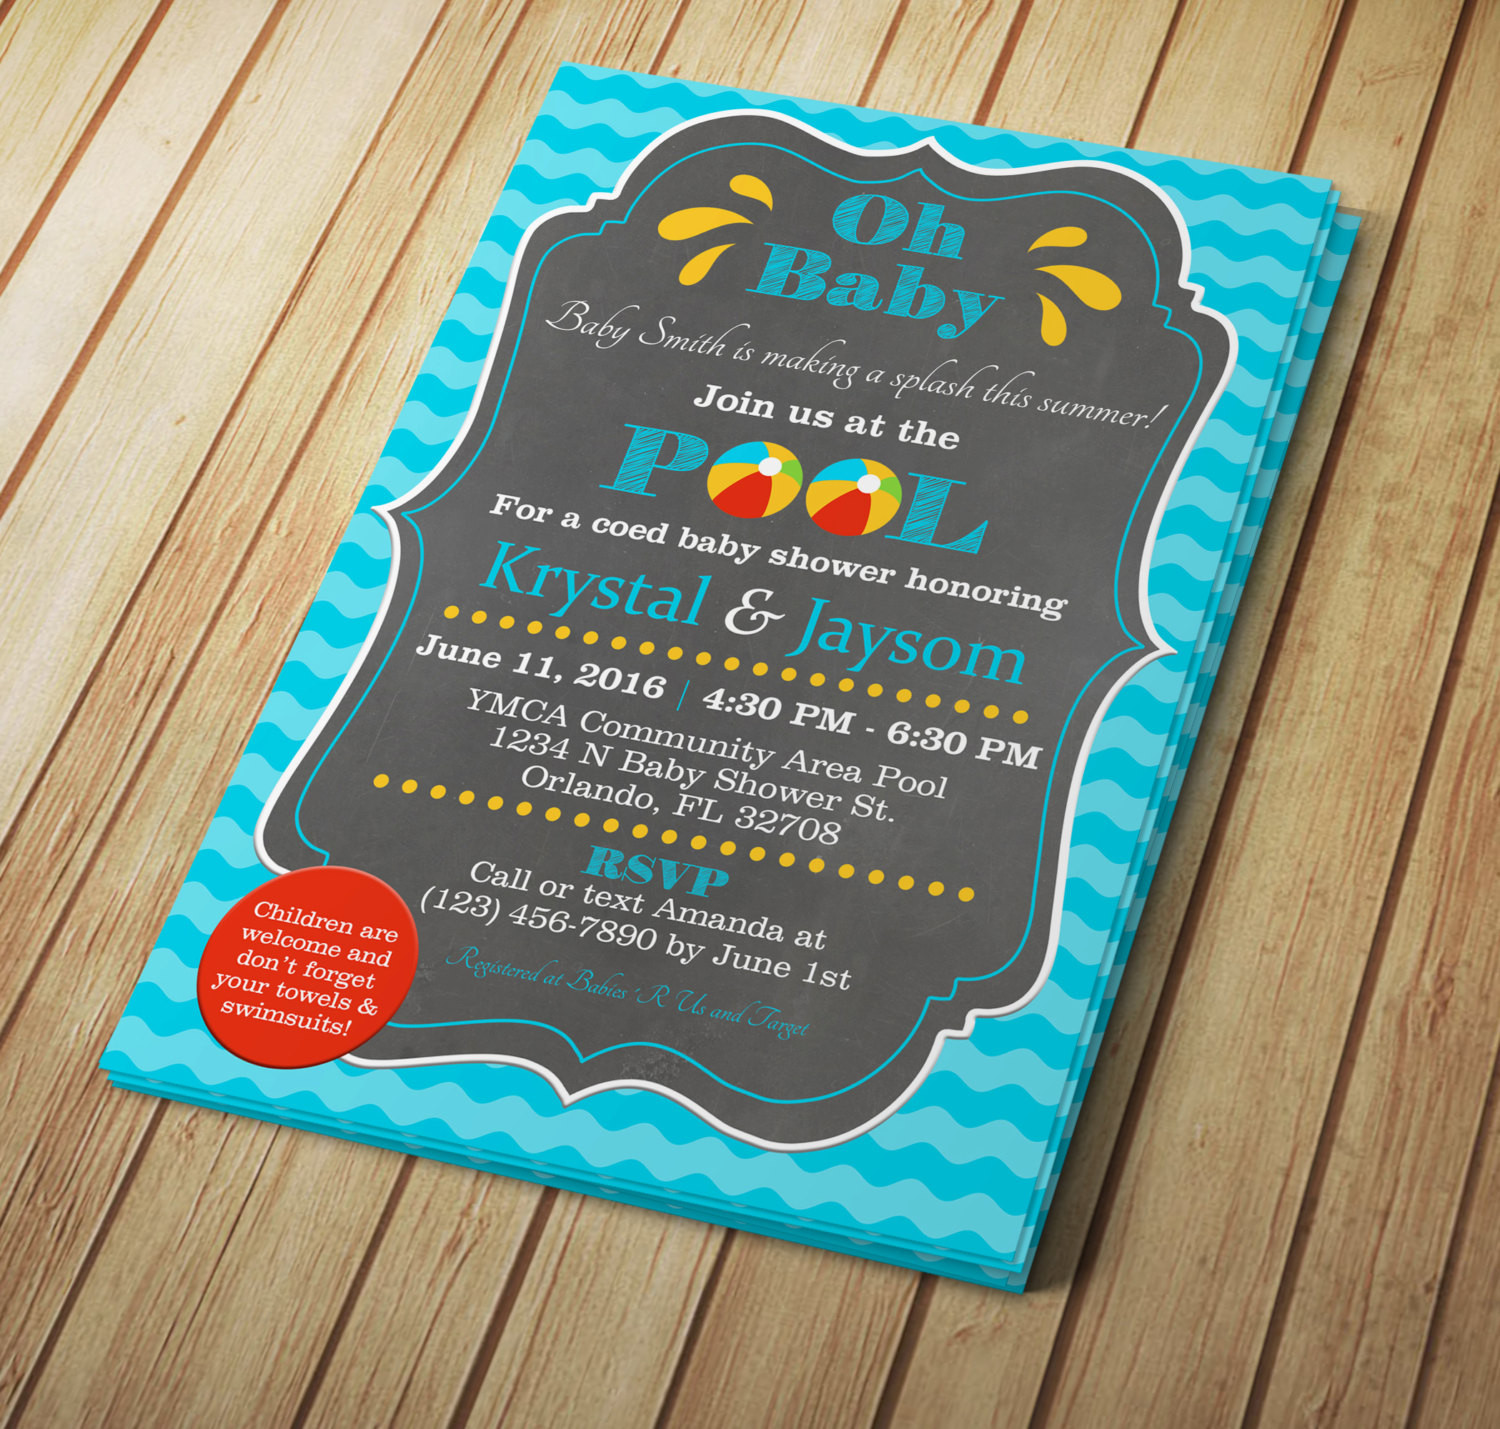 Pool Party Baby Shower Invitations
 5x7 Pool Party Baby Shower Editable Invitation Template